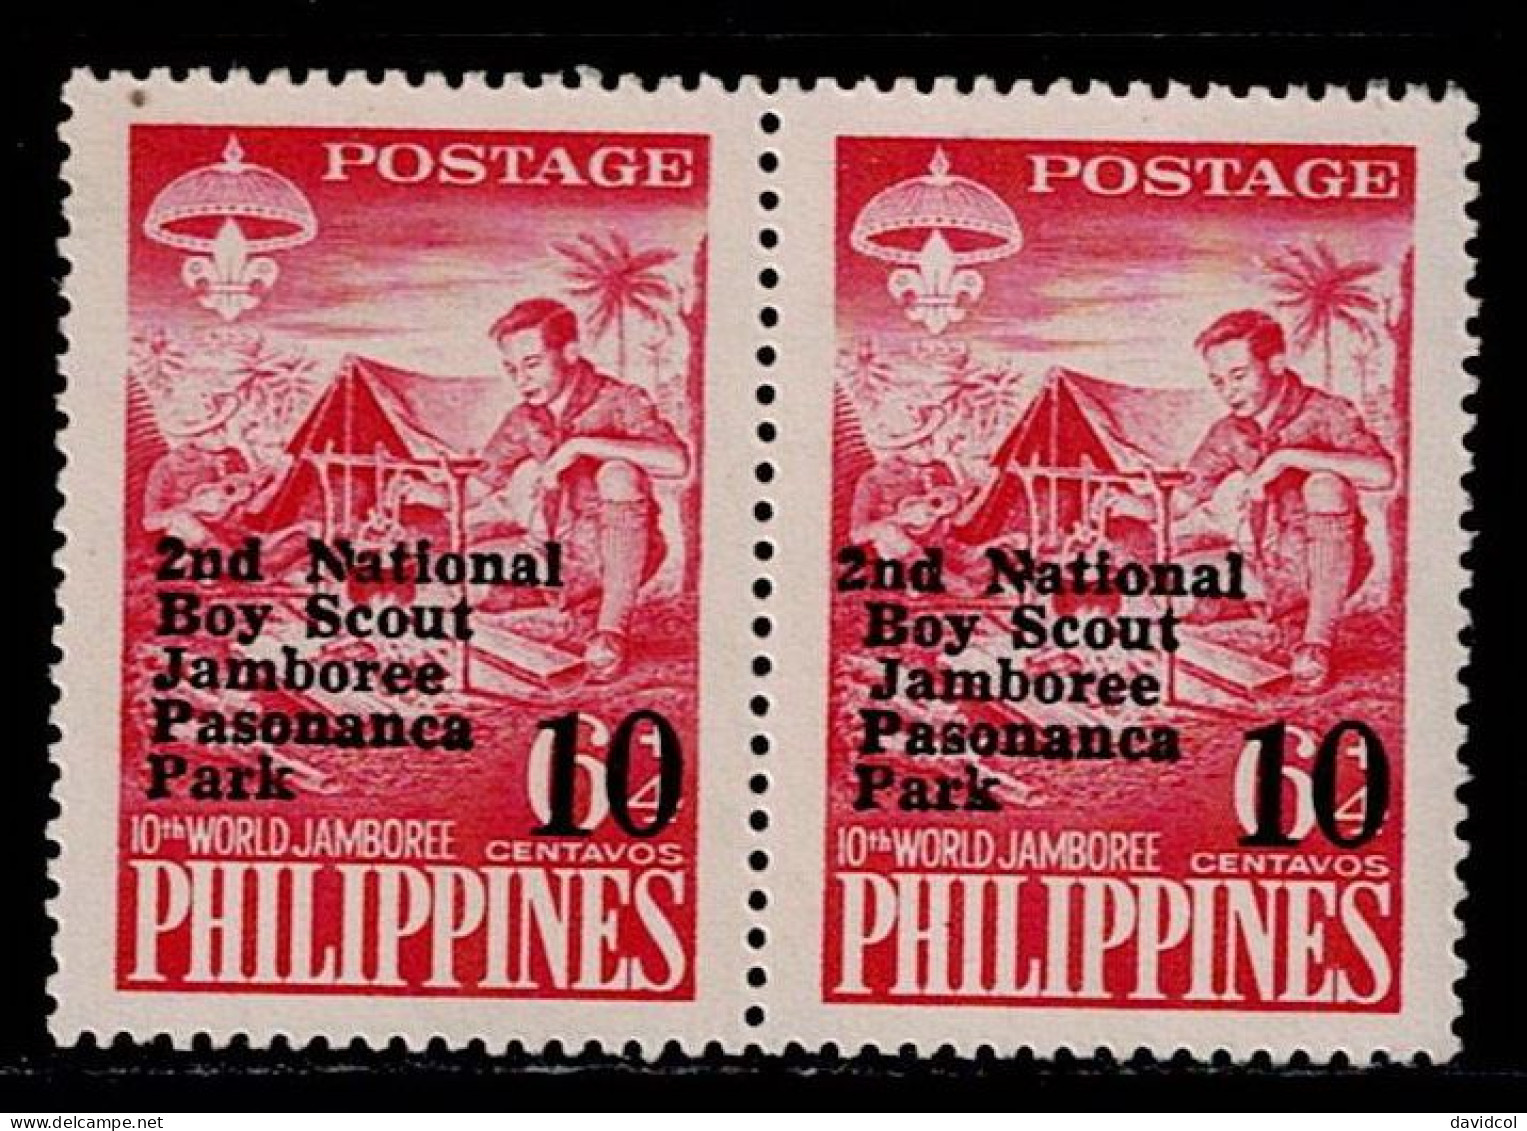 FIL-13- PHILIPPINES - 1961 - MNH -SCOUTS- ERROR - 2ND NATIONAL BOY SCOUT JAMBOREE OVPTD - Philippines